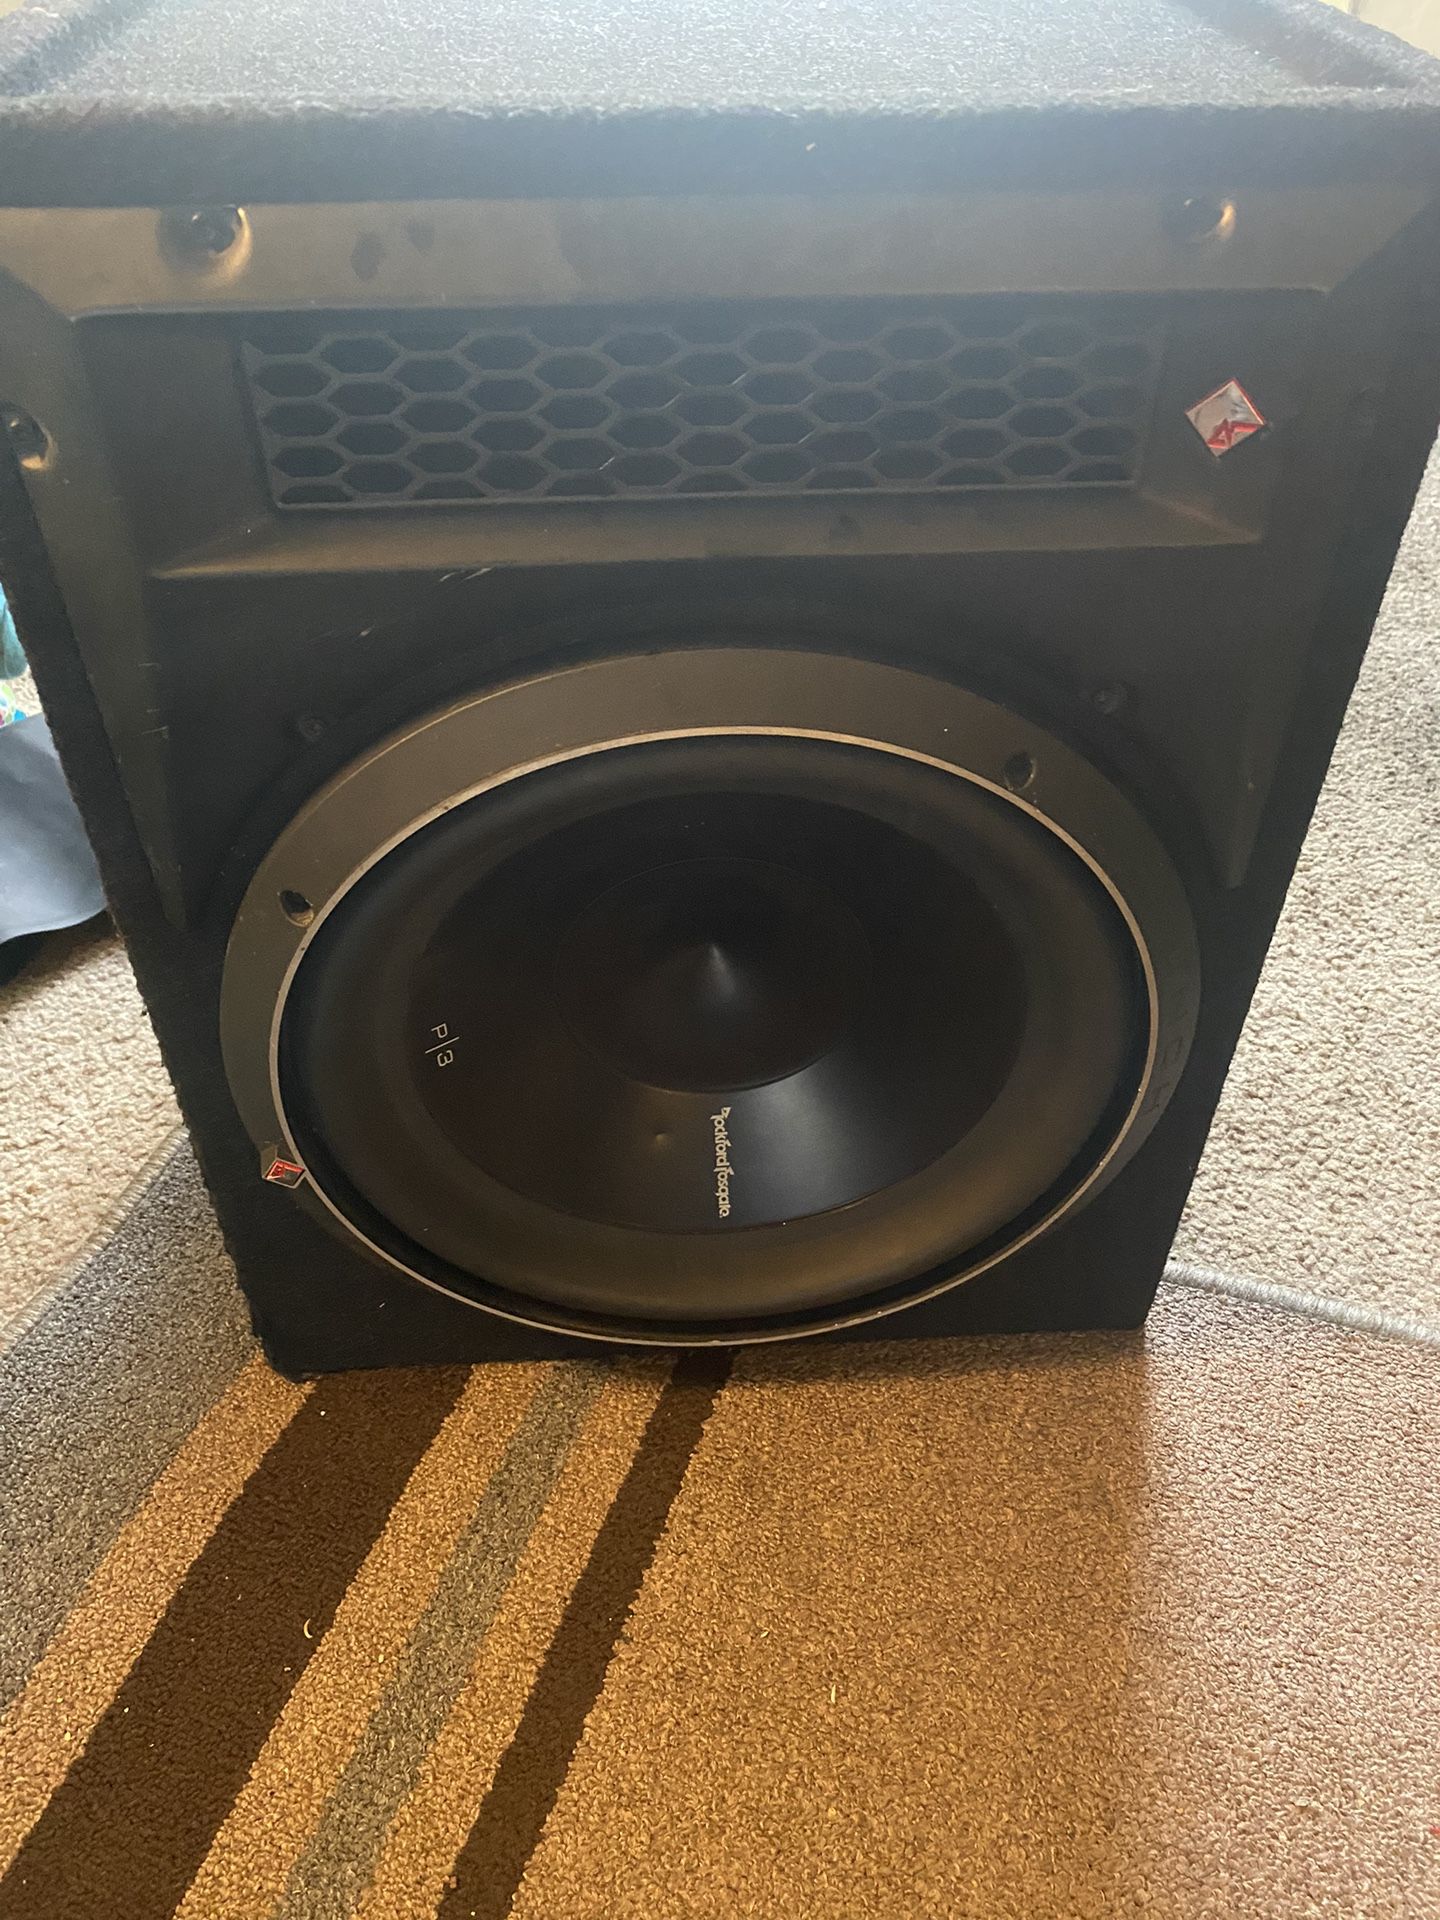 I’m Selling My Subwoofer Rockford Fosgate 12 1200 watts In Original Box I’m Asking For $150 No Lees 